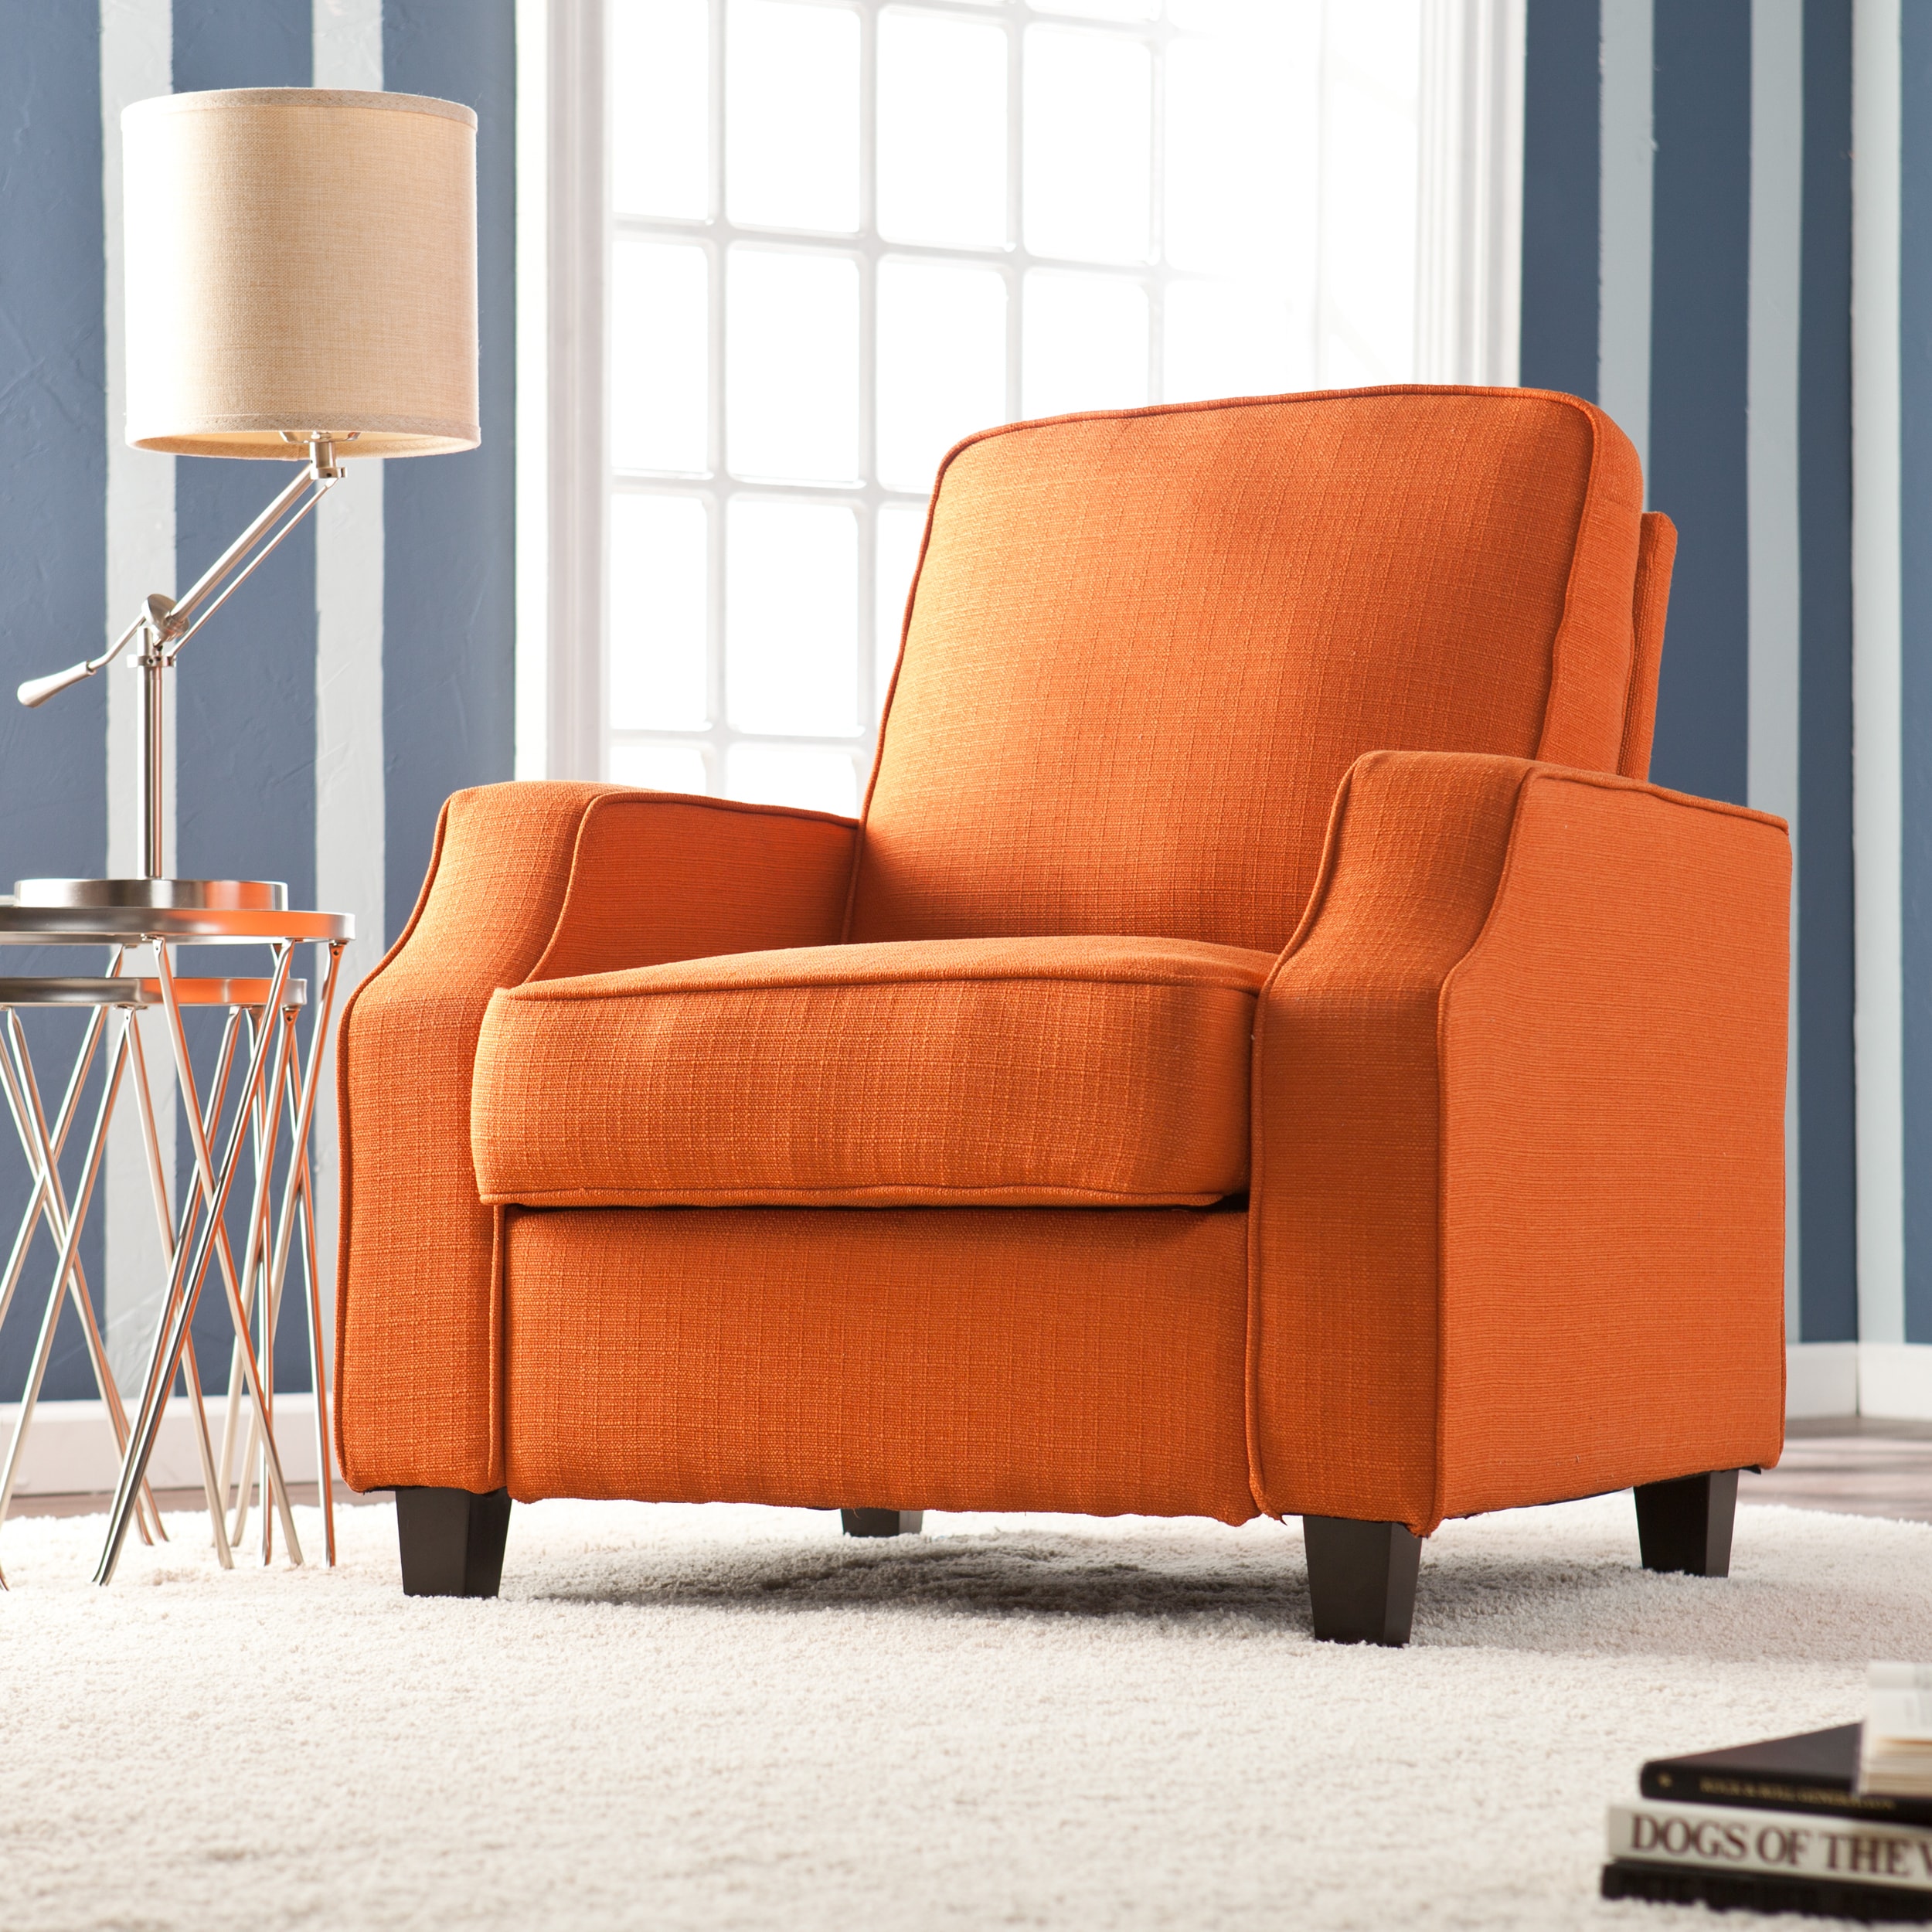 Upton Home Corey Orange Upholstered Accent Arm Chair